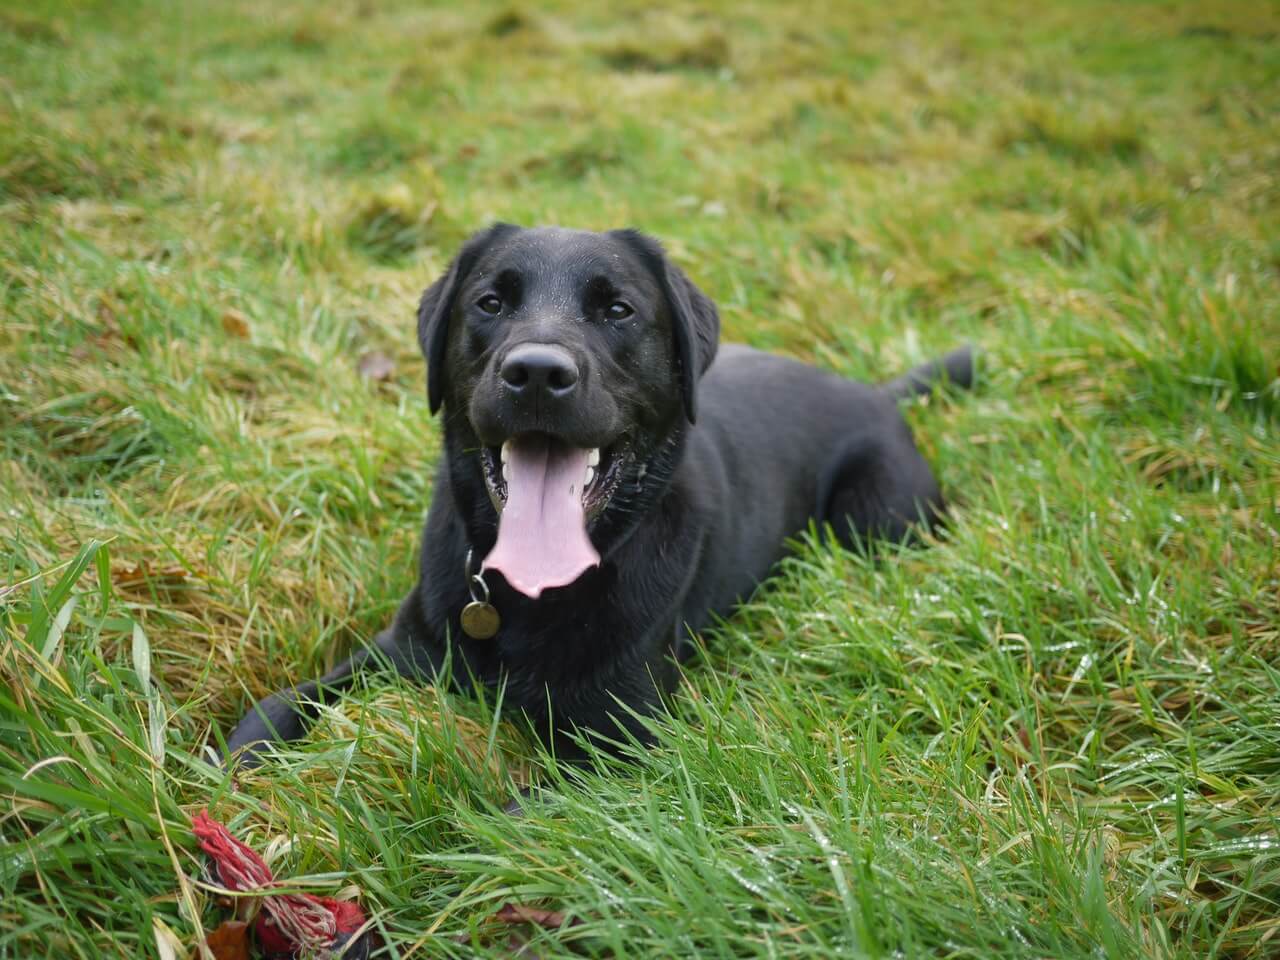 Playful Black Labrador in the grass lying down with its tongue hanging out.